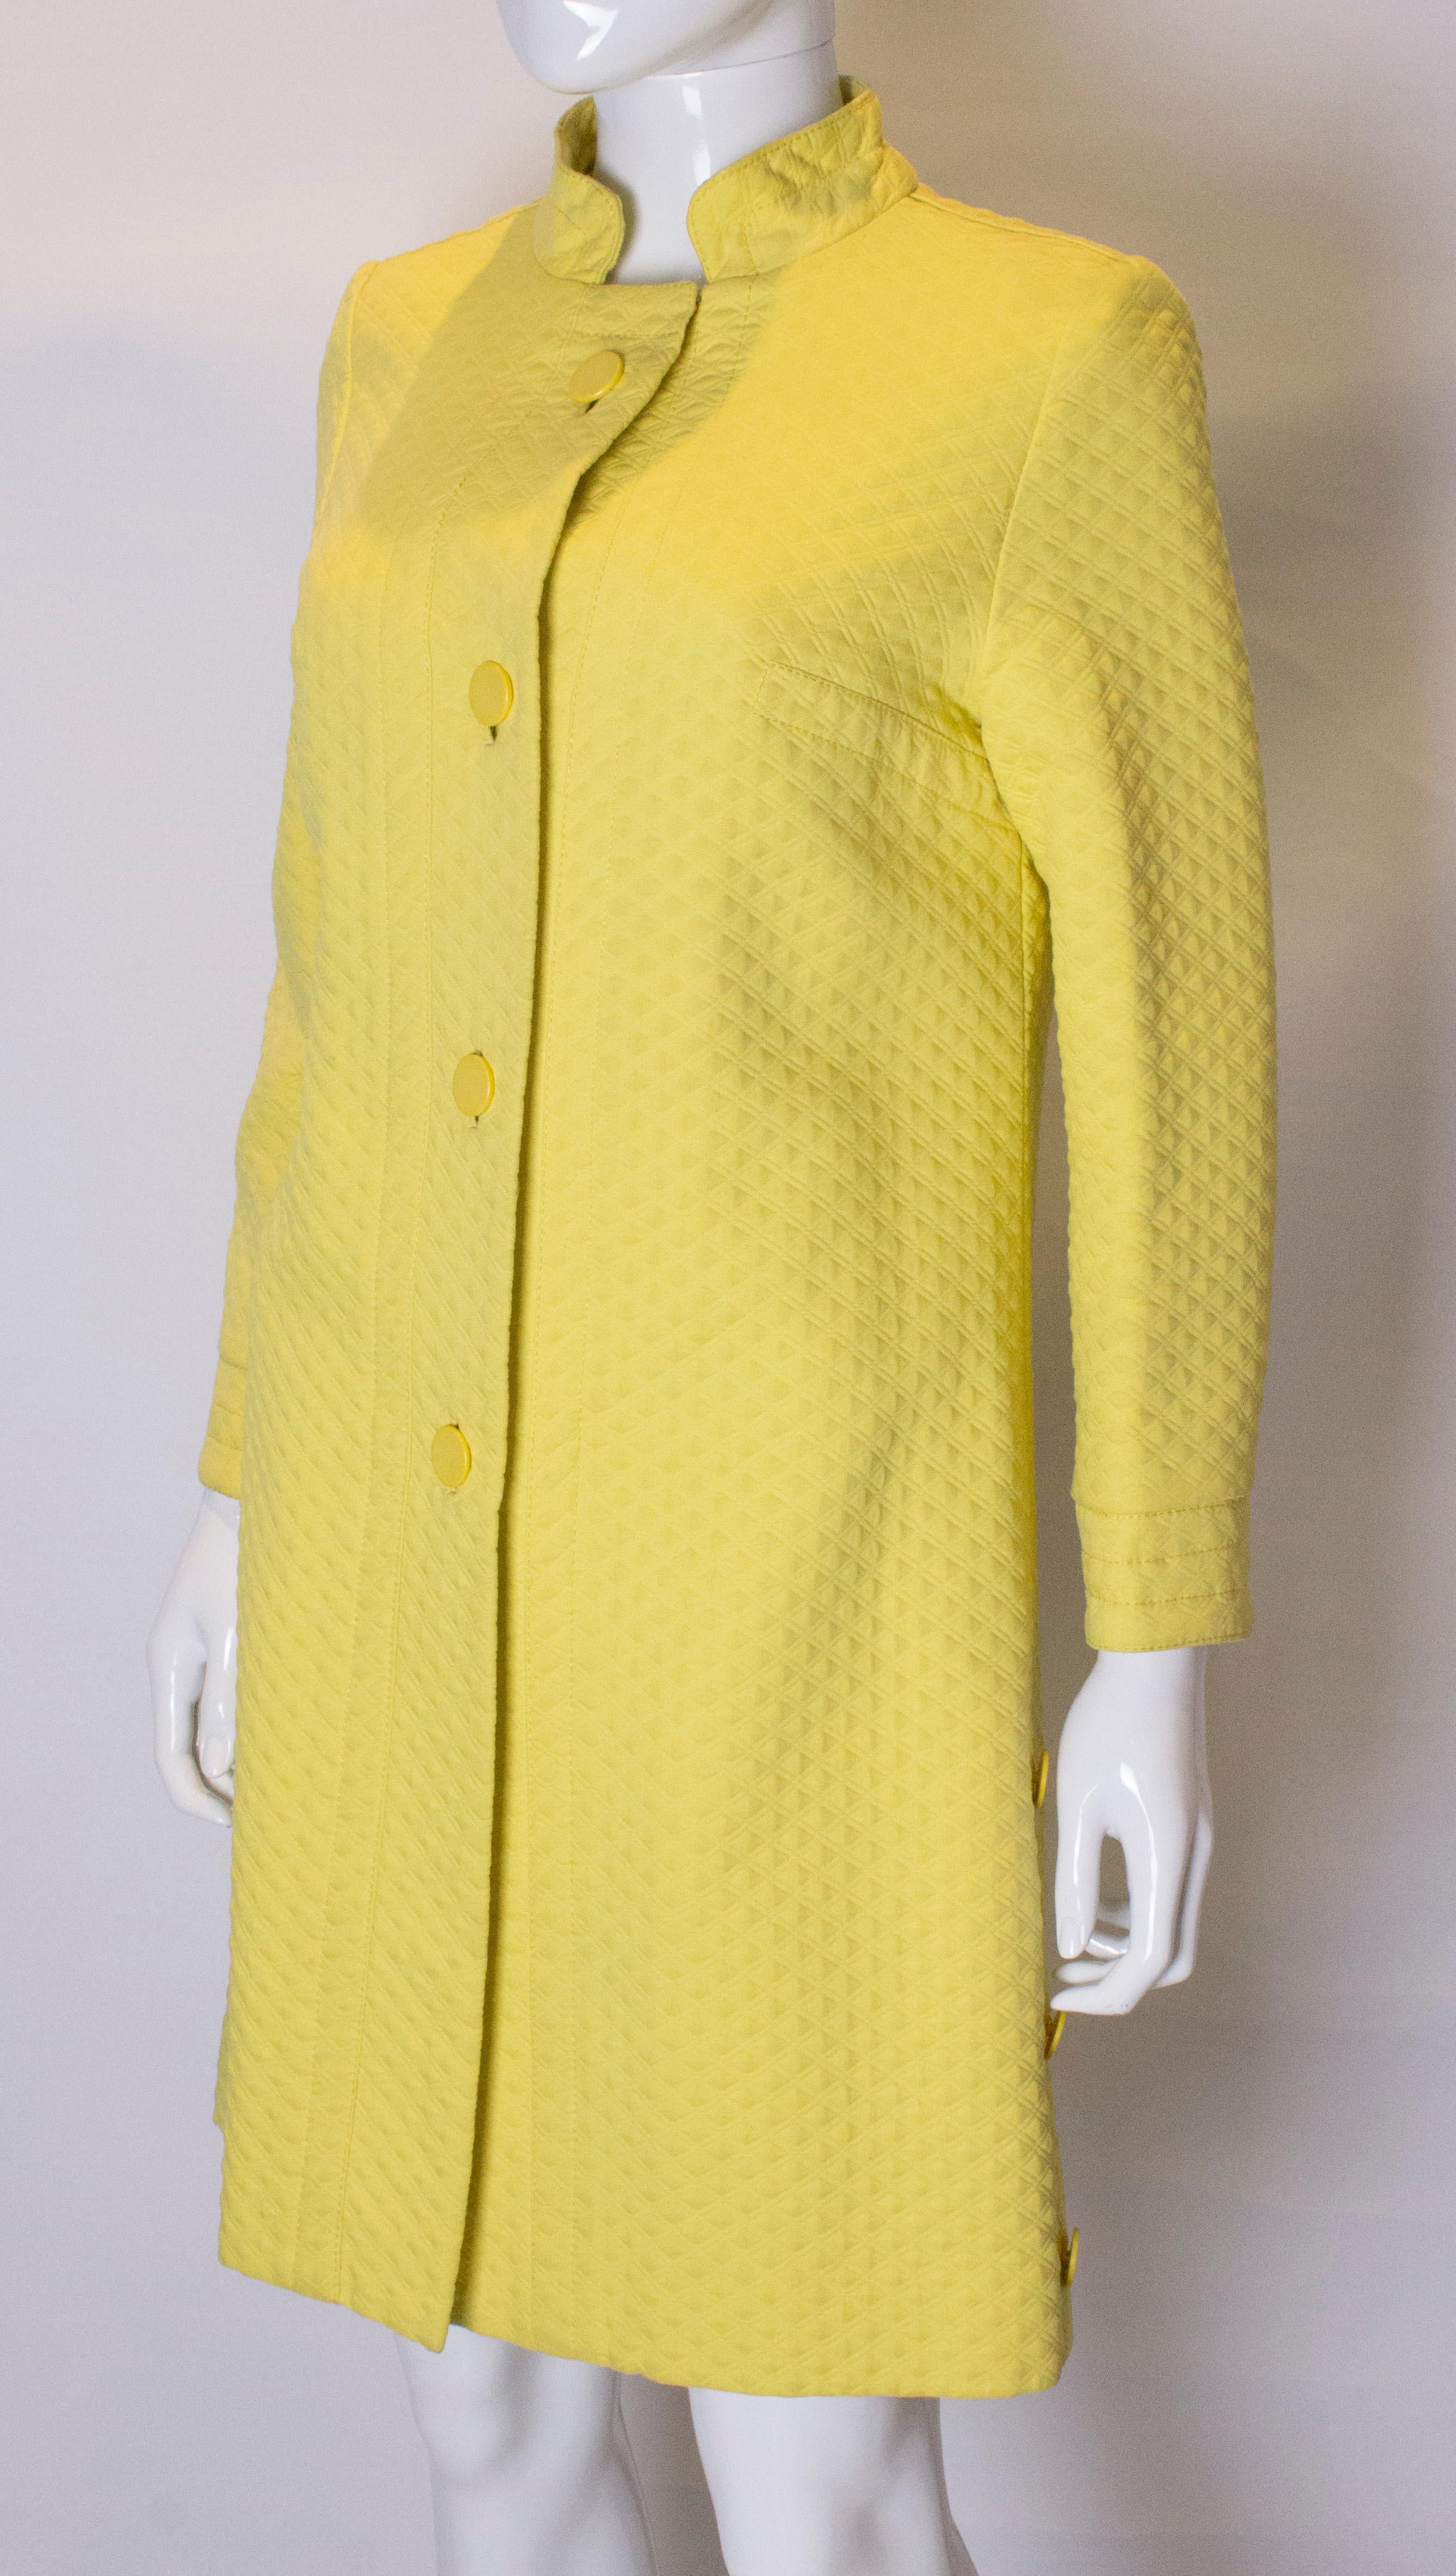 Women's Chic Vintage Yellow Coat For Sale